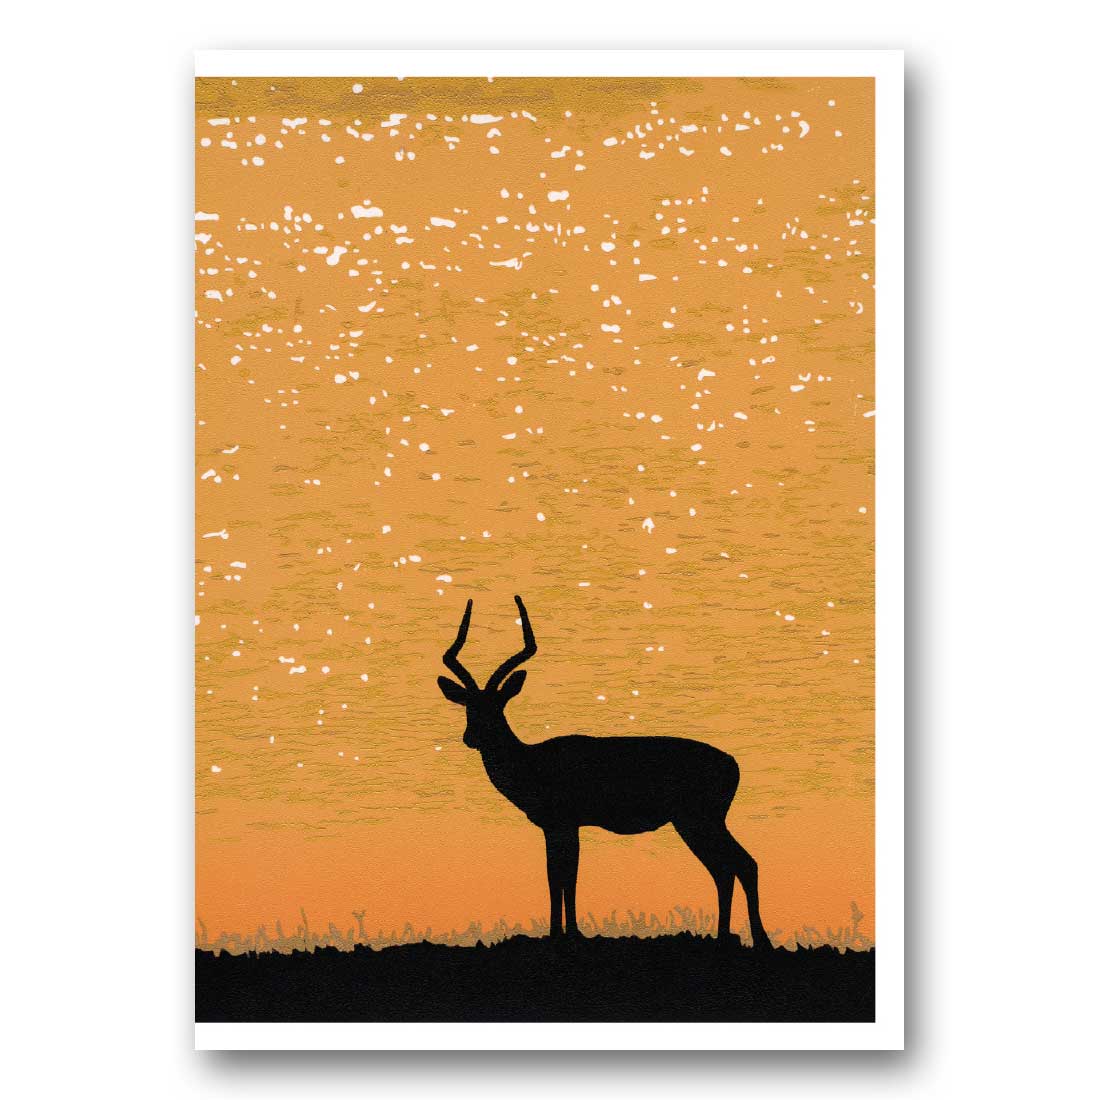 At the end of the day – Greeting Card